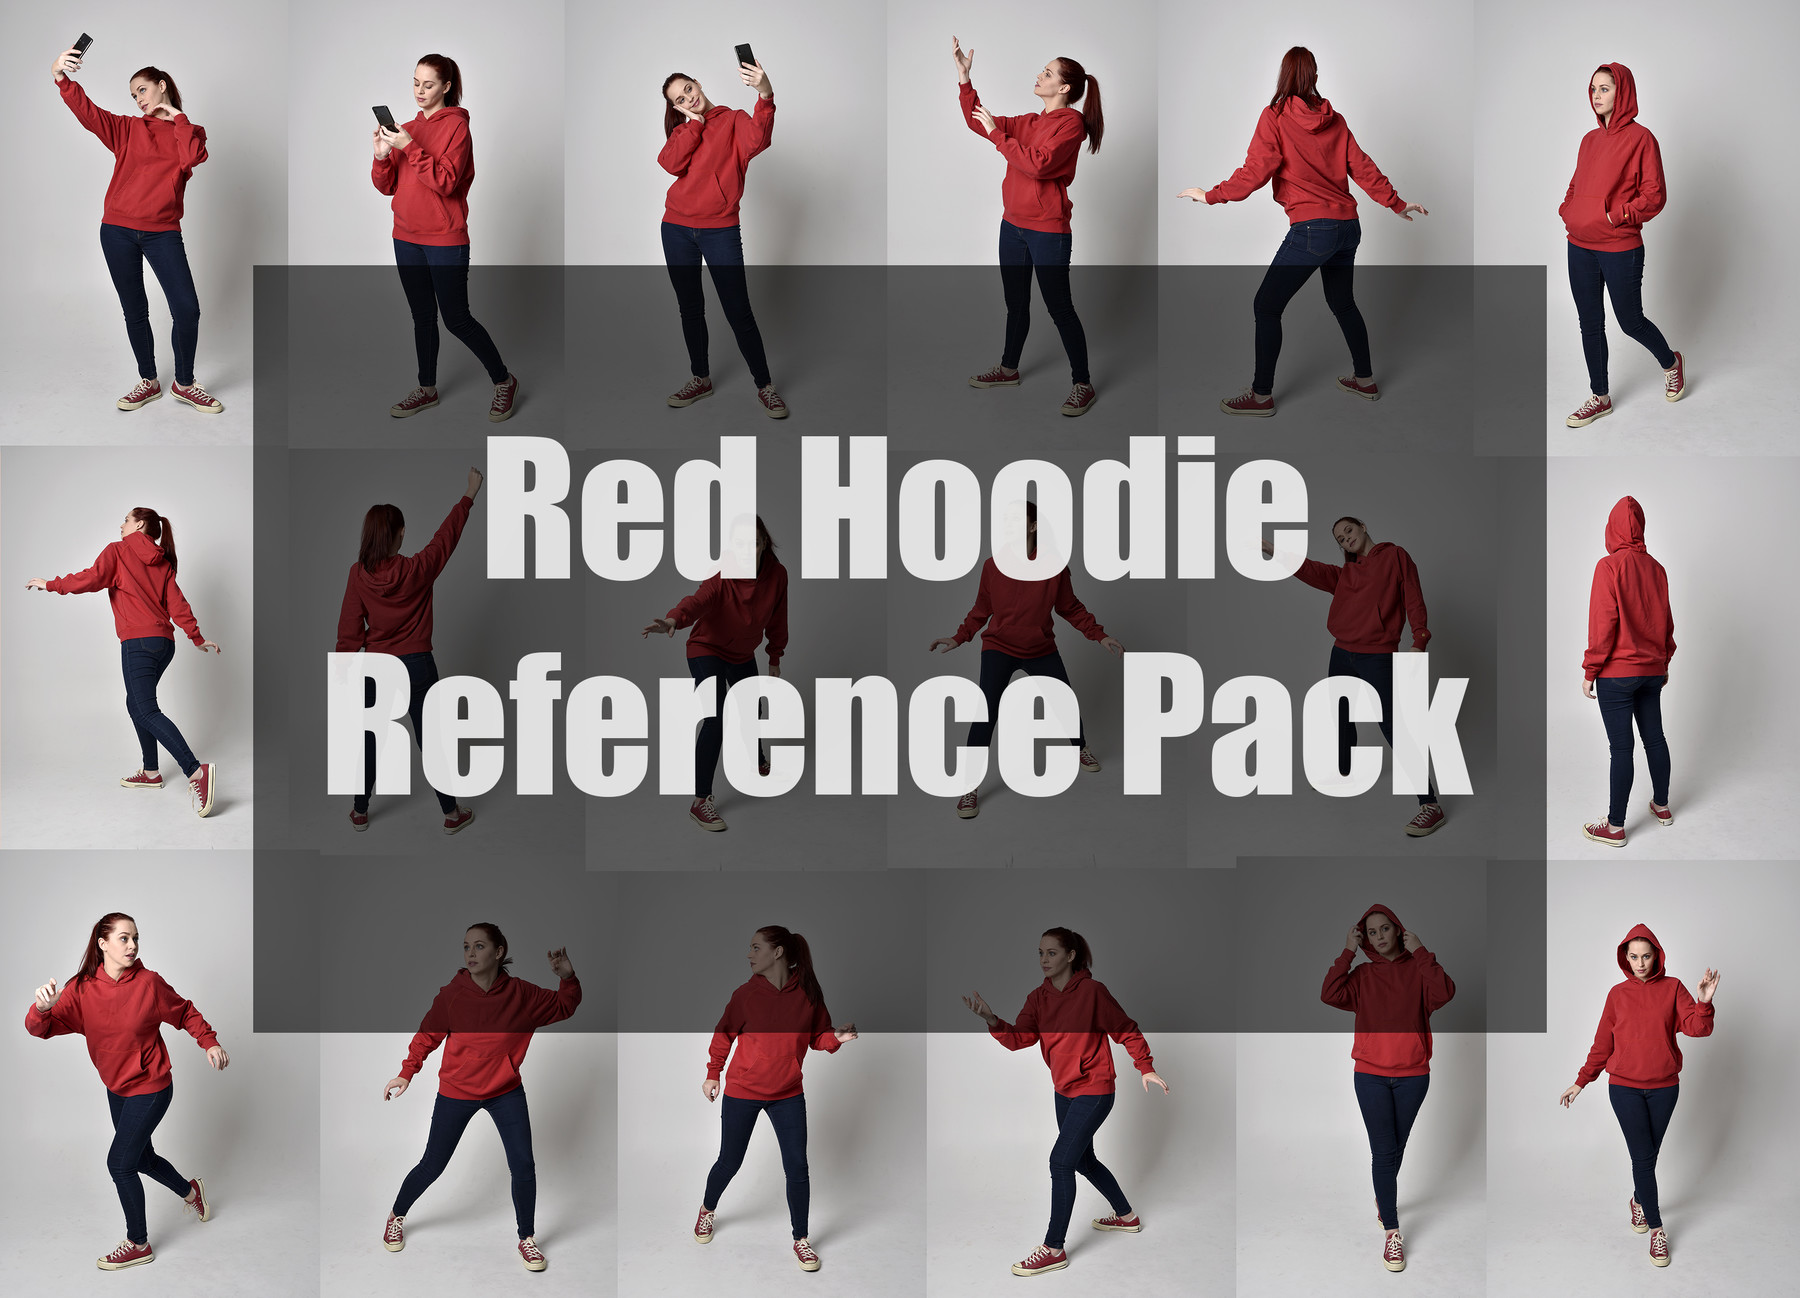 Hoodie Drawing Reference and Sketches for Artists